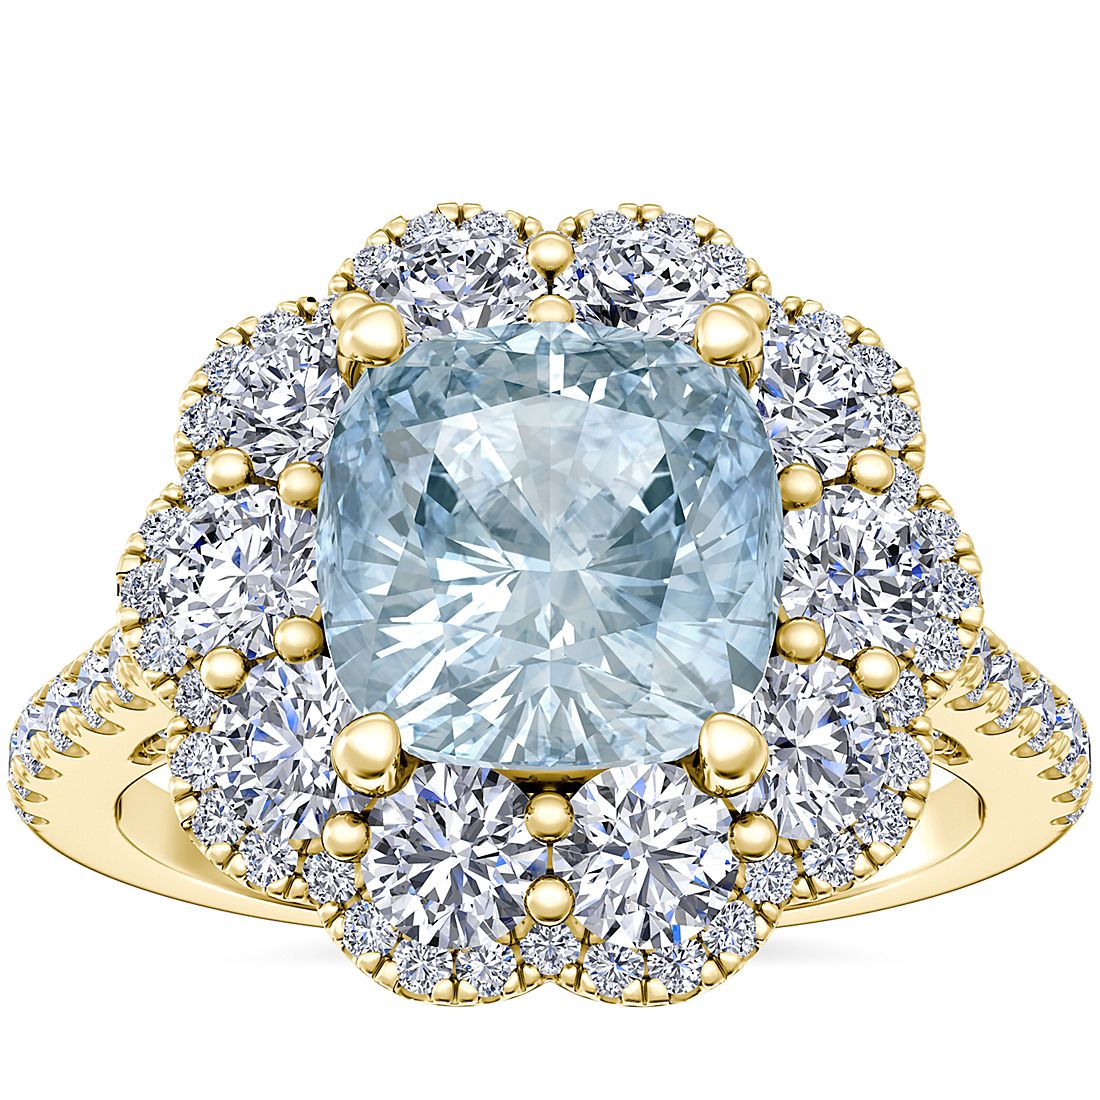 Vintage Diamond Halo Engagement Ring with Cushion Aquamarine in 14k Yellow Gold (8mm)